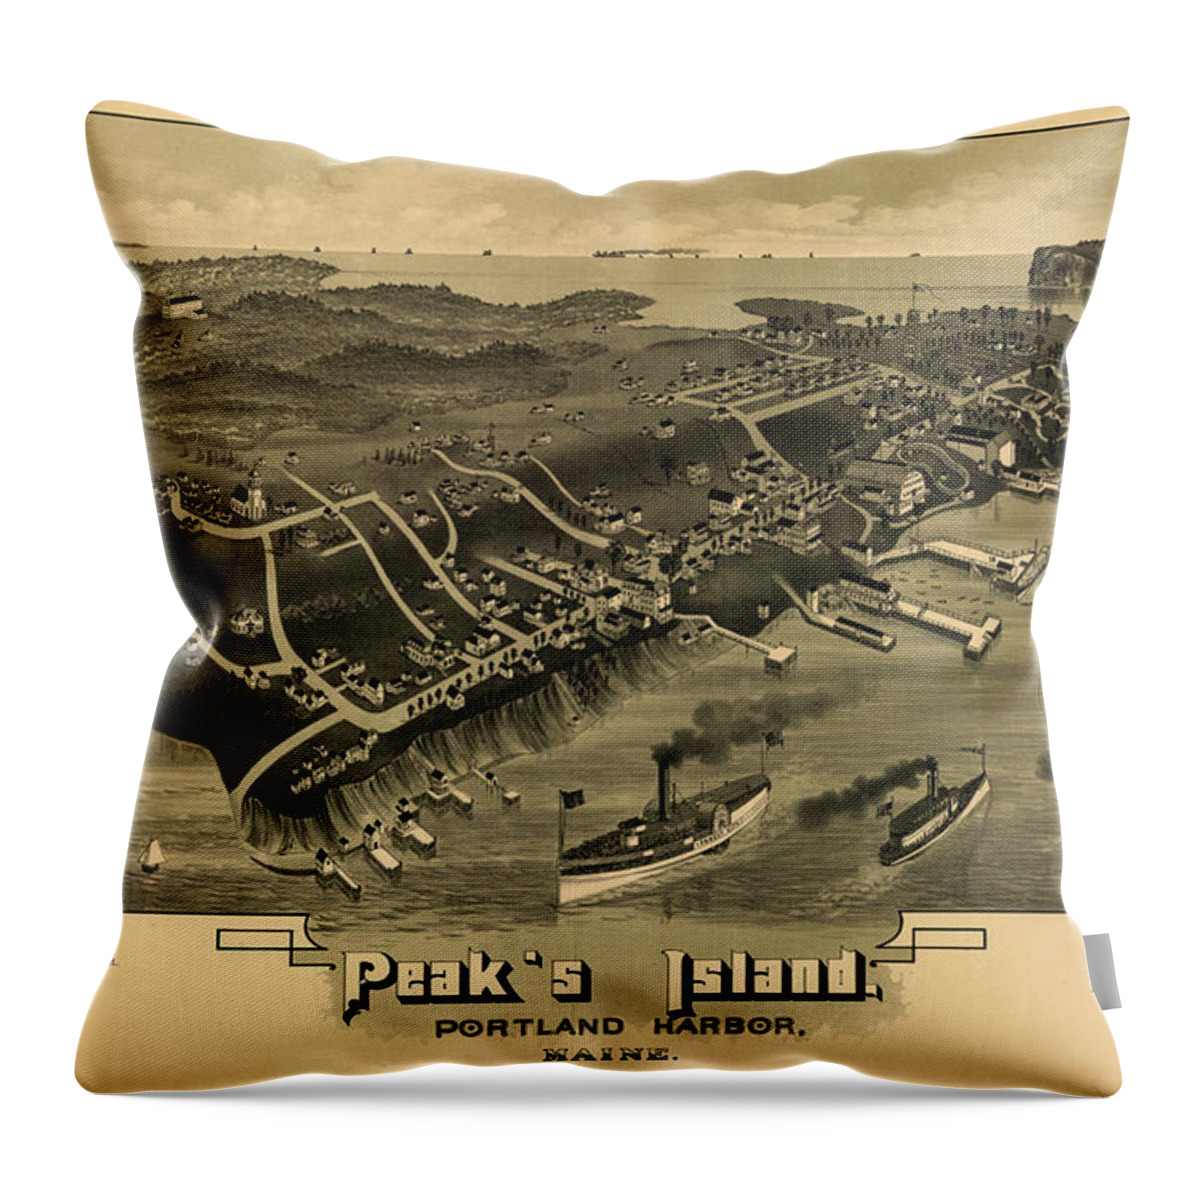 Bird's Eye View Throw Pillow featuring the painting Peak's Island, Portland harbor, Maine by Geo Walker